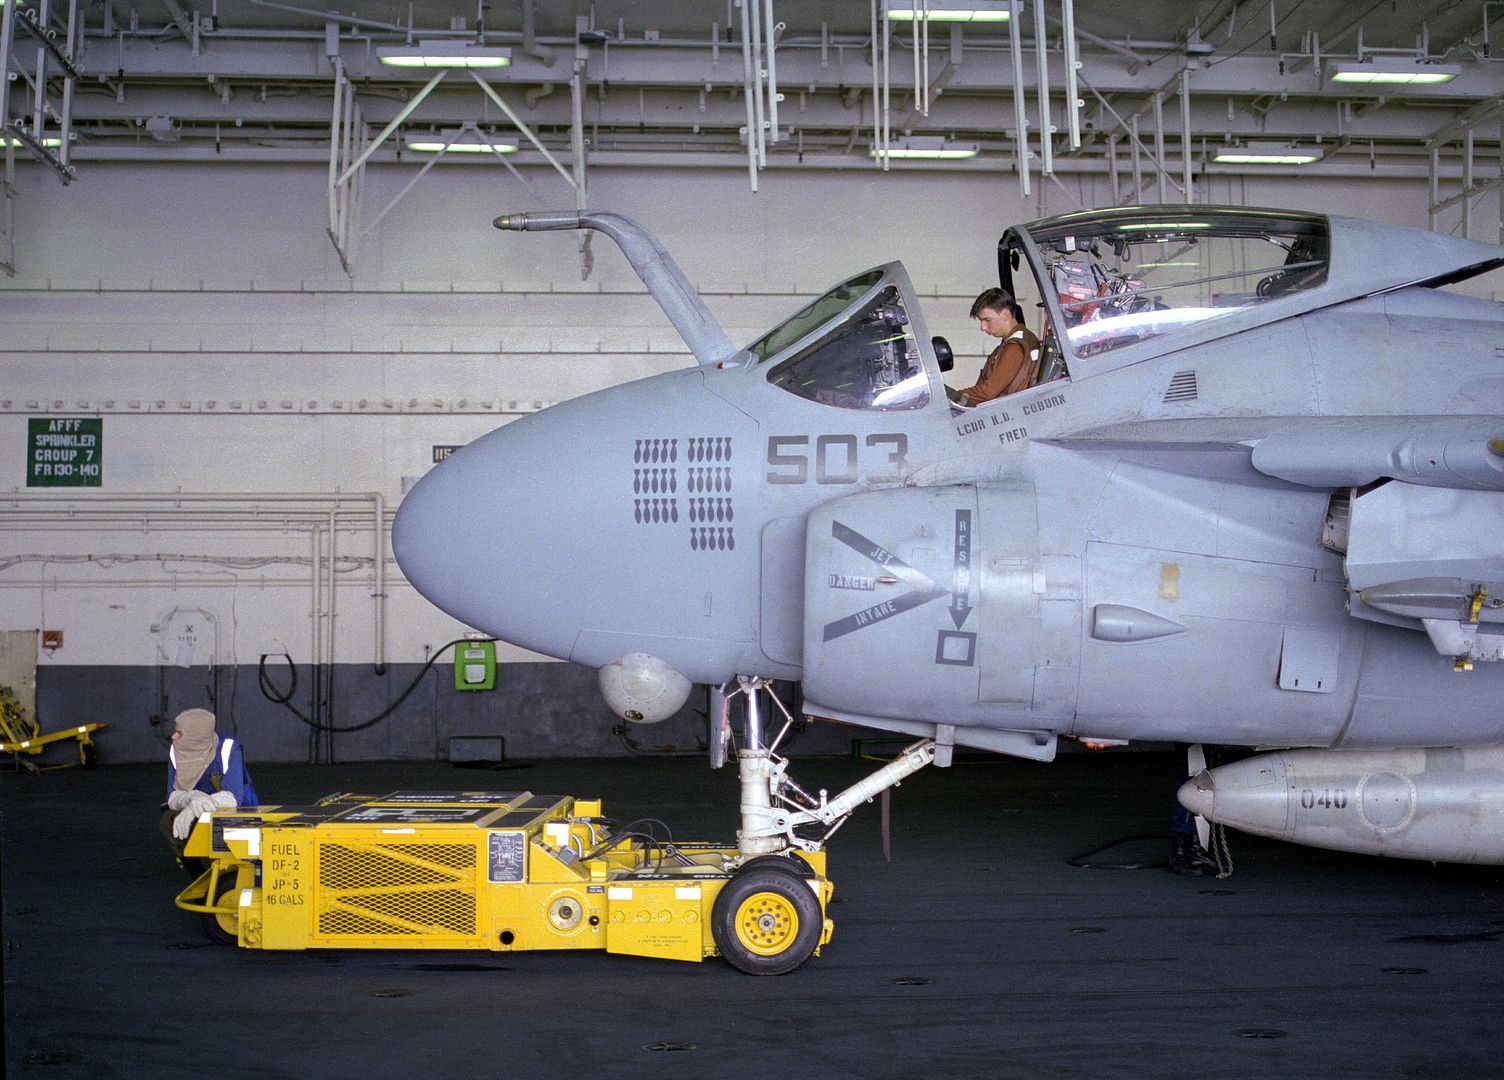 A Crewman Manning An SD 1D Aircraft Spotting Dolly Waits While A Shipmate Inspects The Cockpit Of An Attack Squadron 75 A 6E Intruder Aircraft N The Hangar Deck Of The Aircraft Carrier USS KITTY HAWK